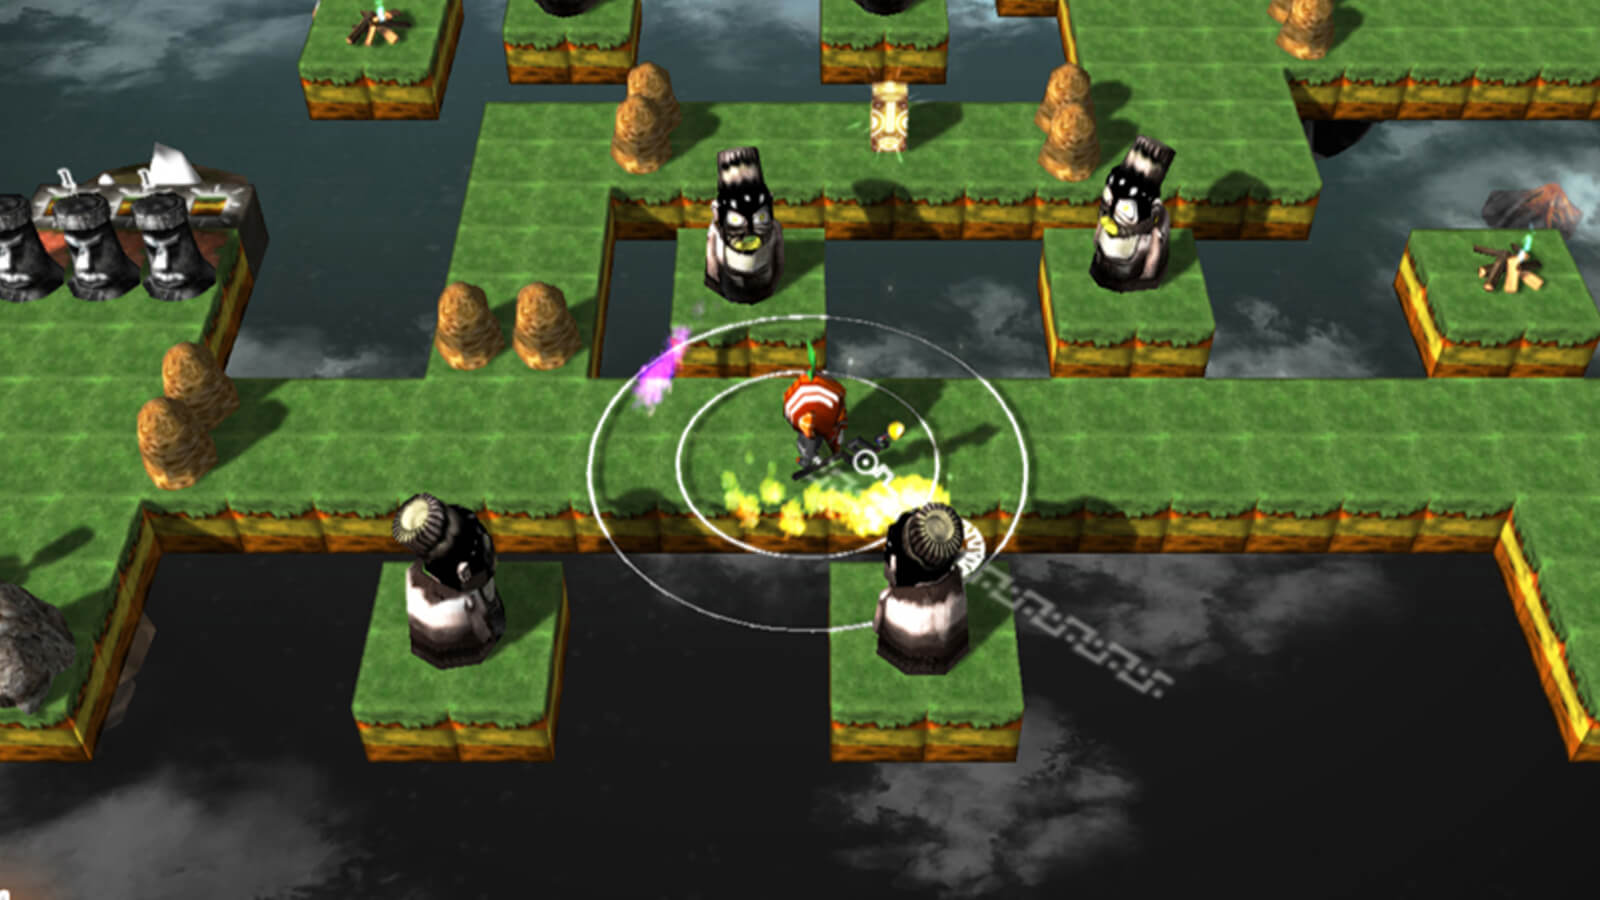 The player's character stands on a green grid platform floating in space as four black-and-white figures stare on.